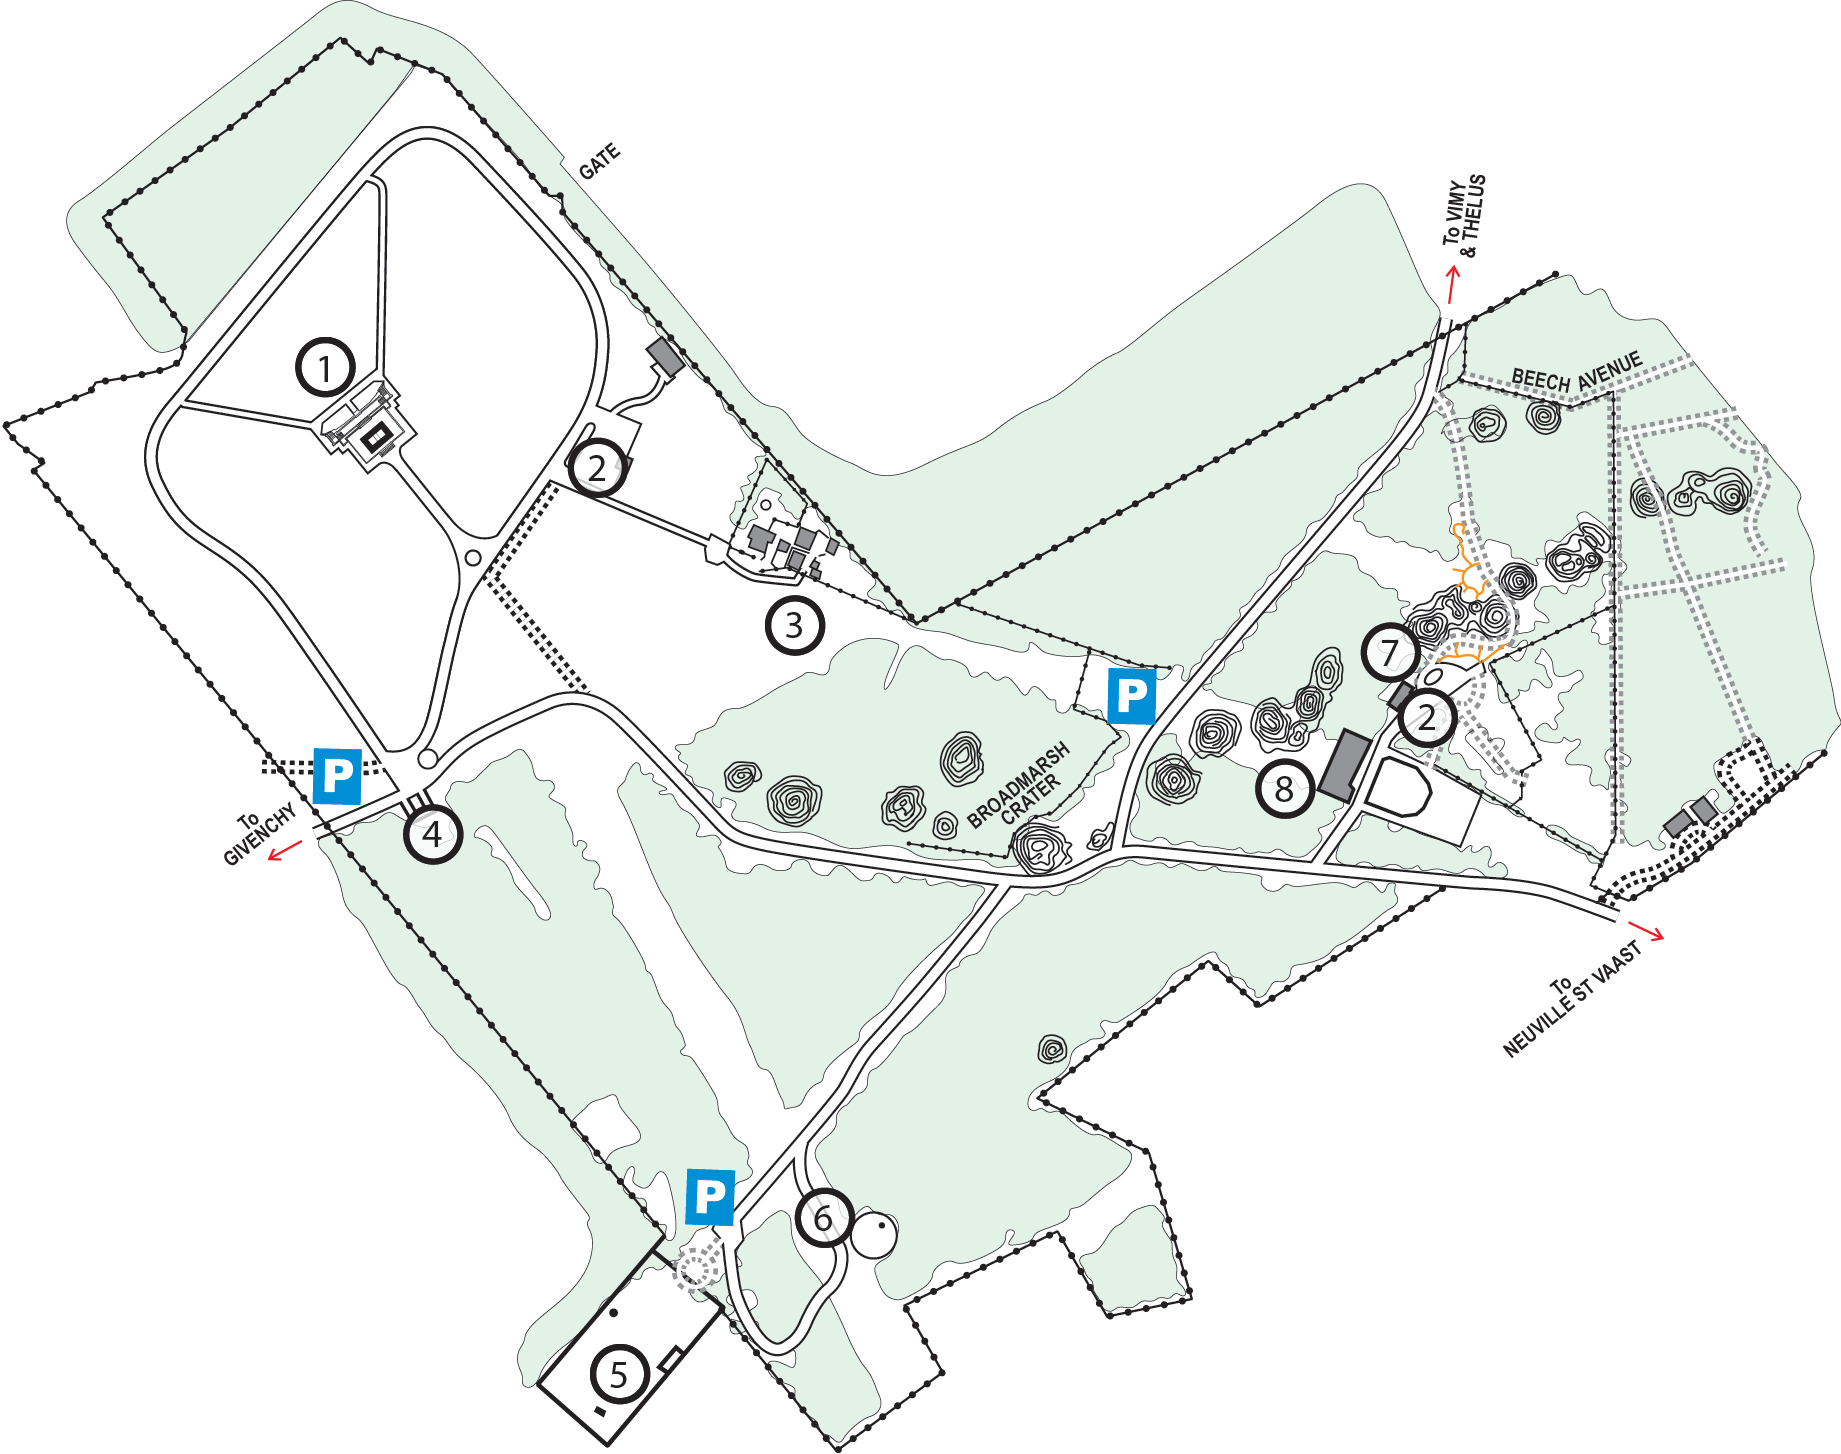 Map of the Canadian National Vimy Memorial site, showing points of interest.  Legend details in text following the image.